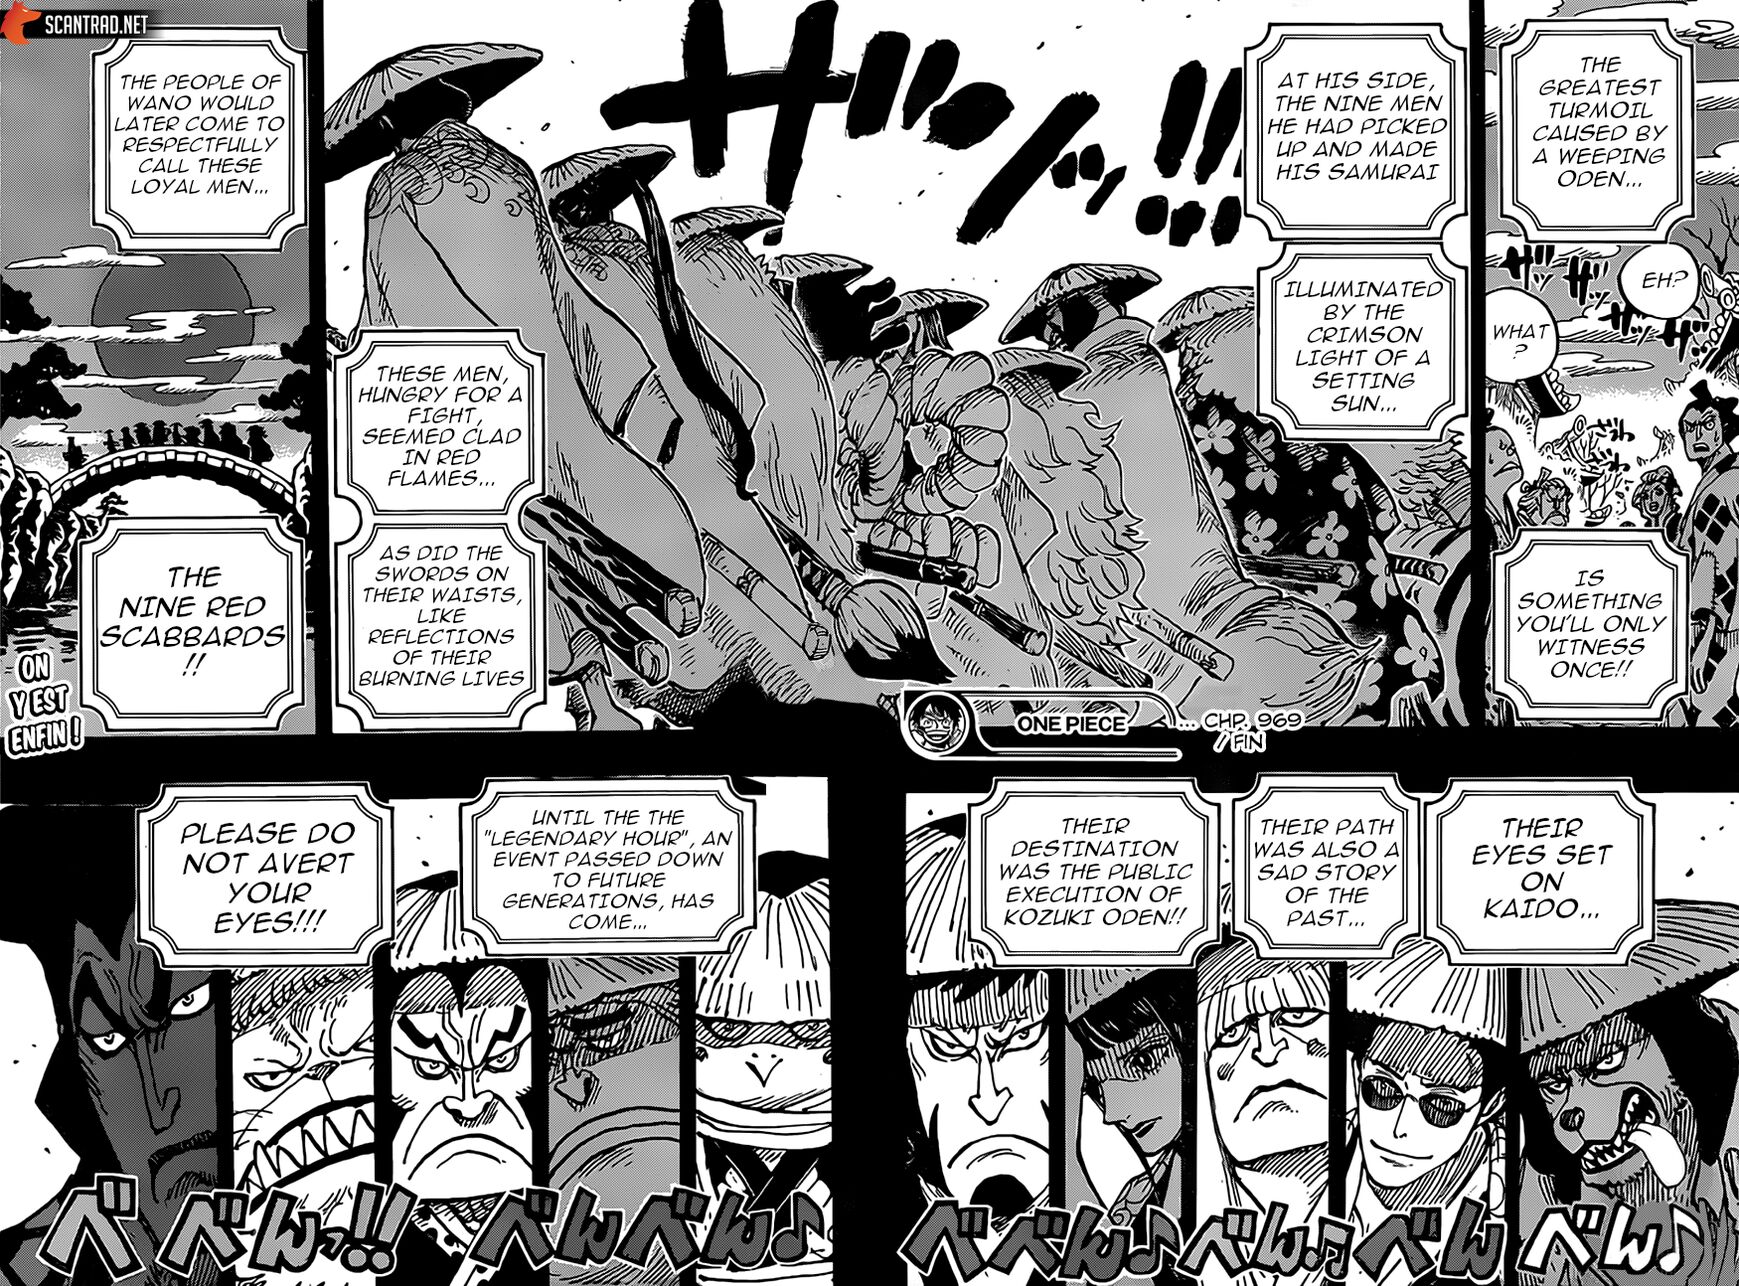 One Piece, Chapter 969 - Vol.69 Ch.969 image 14